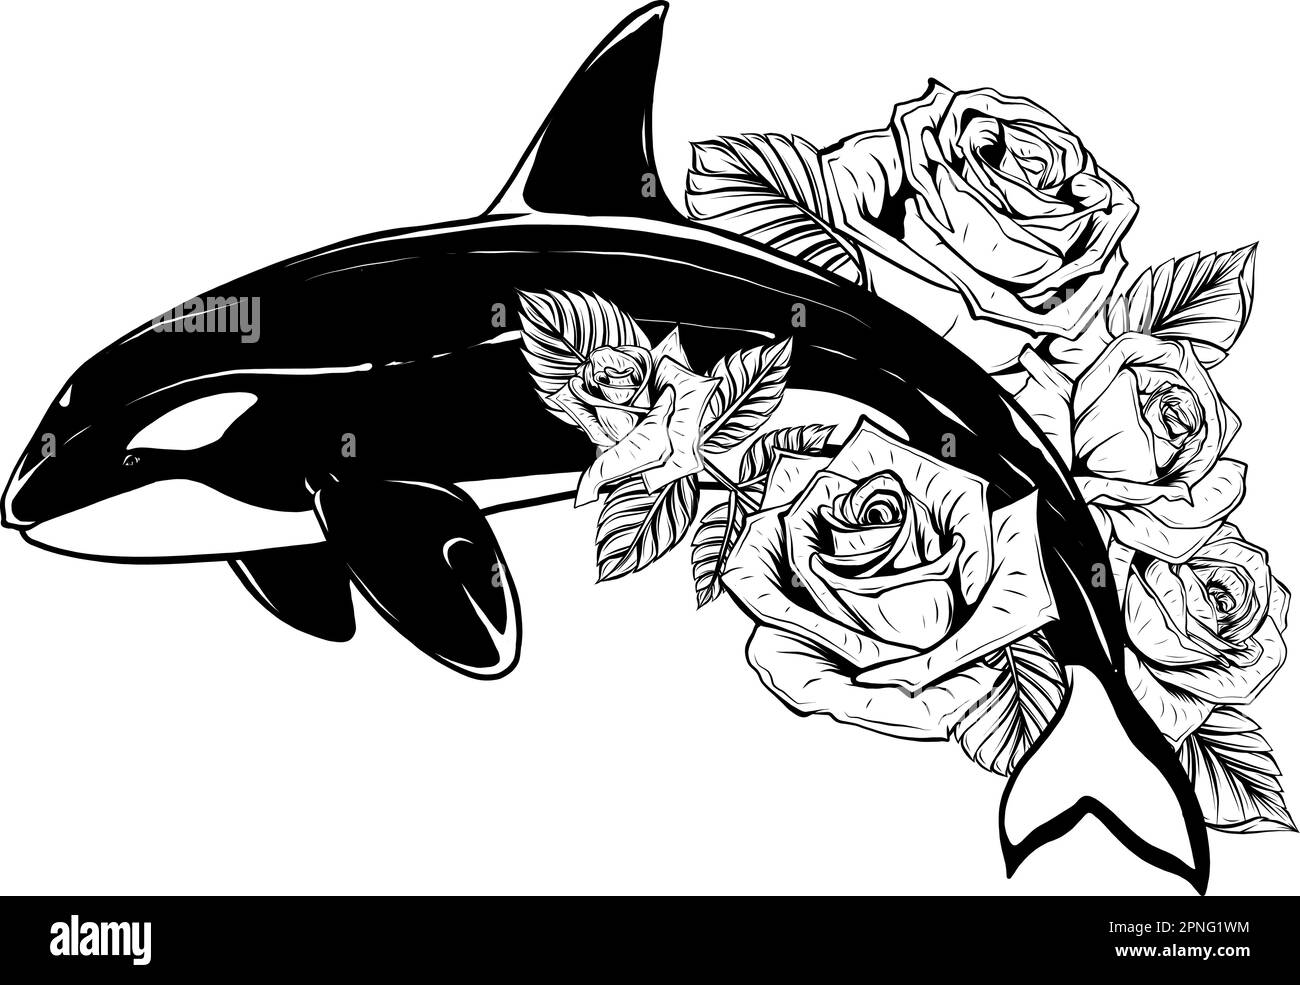 monochrome drawing of a jumping orca whale in black and white Stock ...